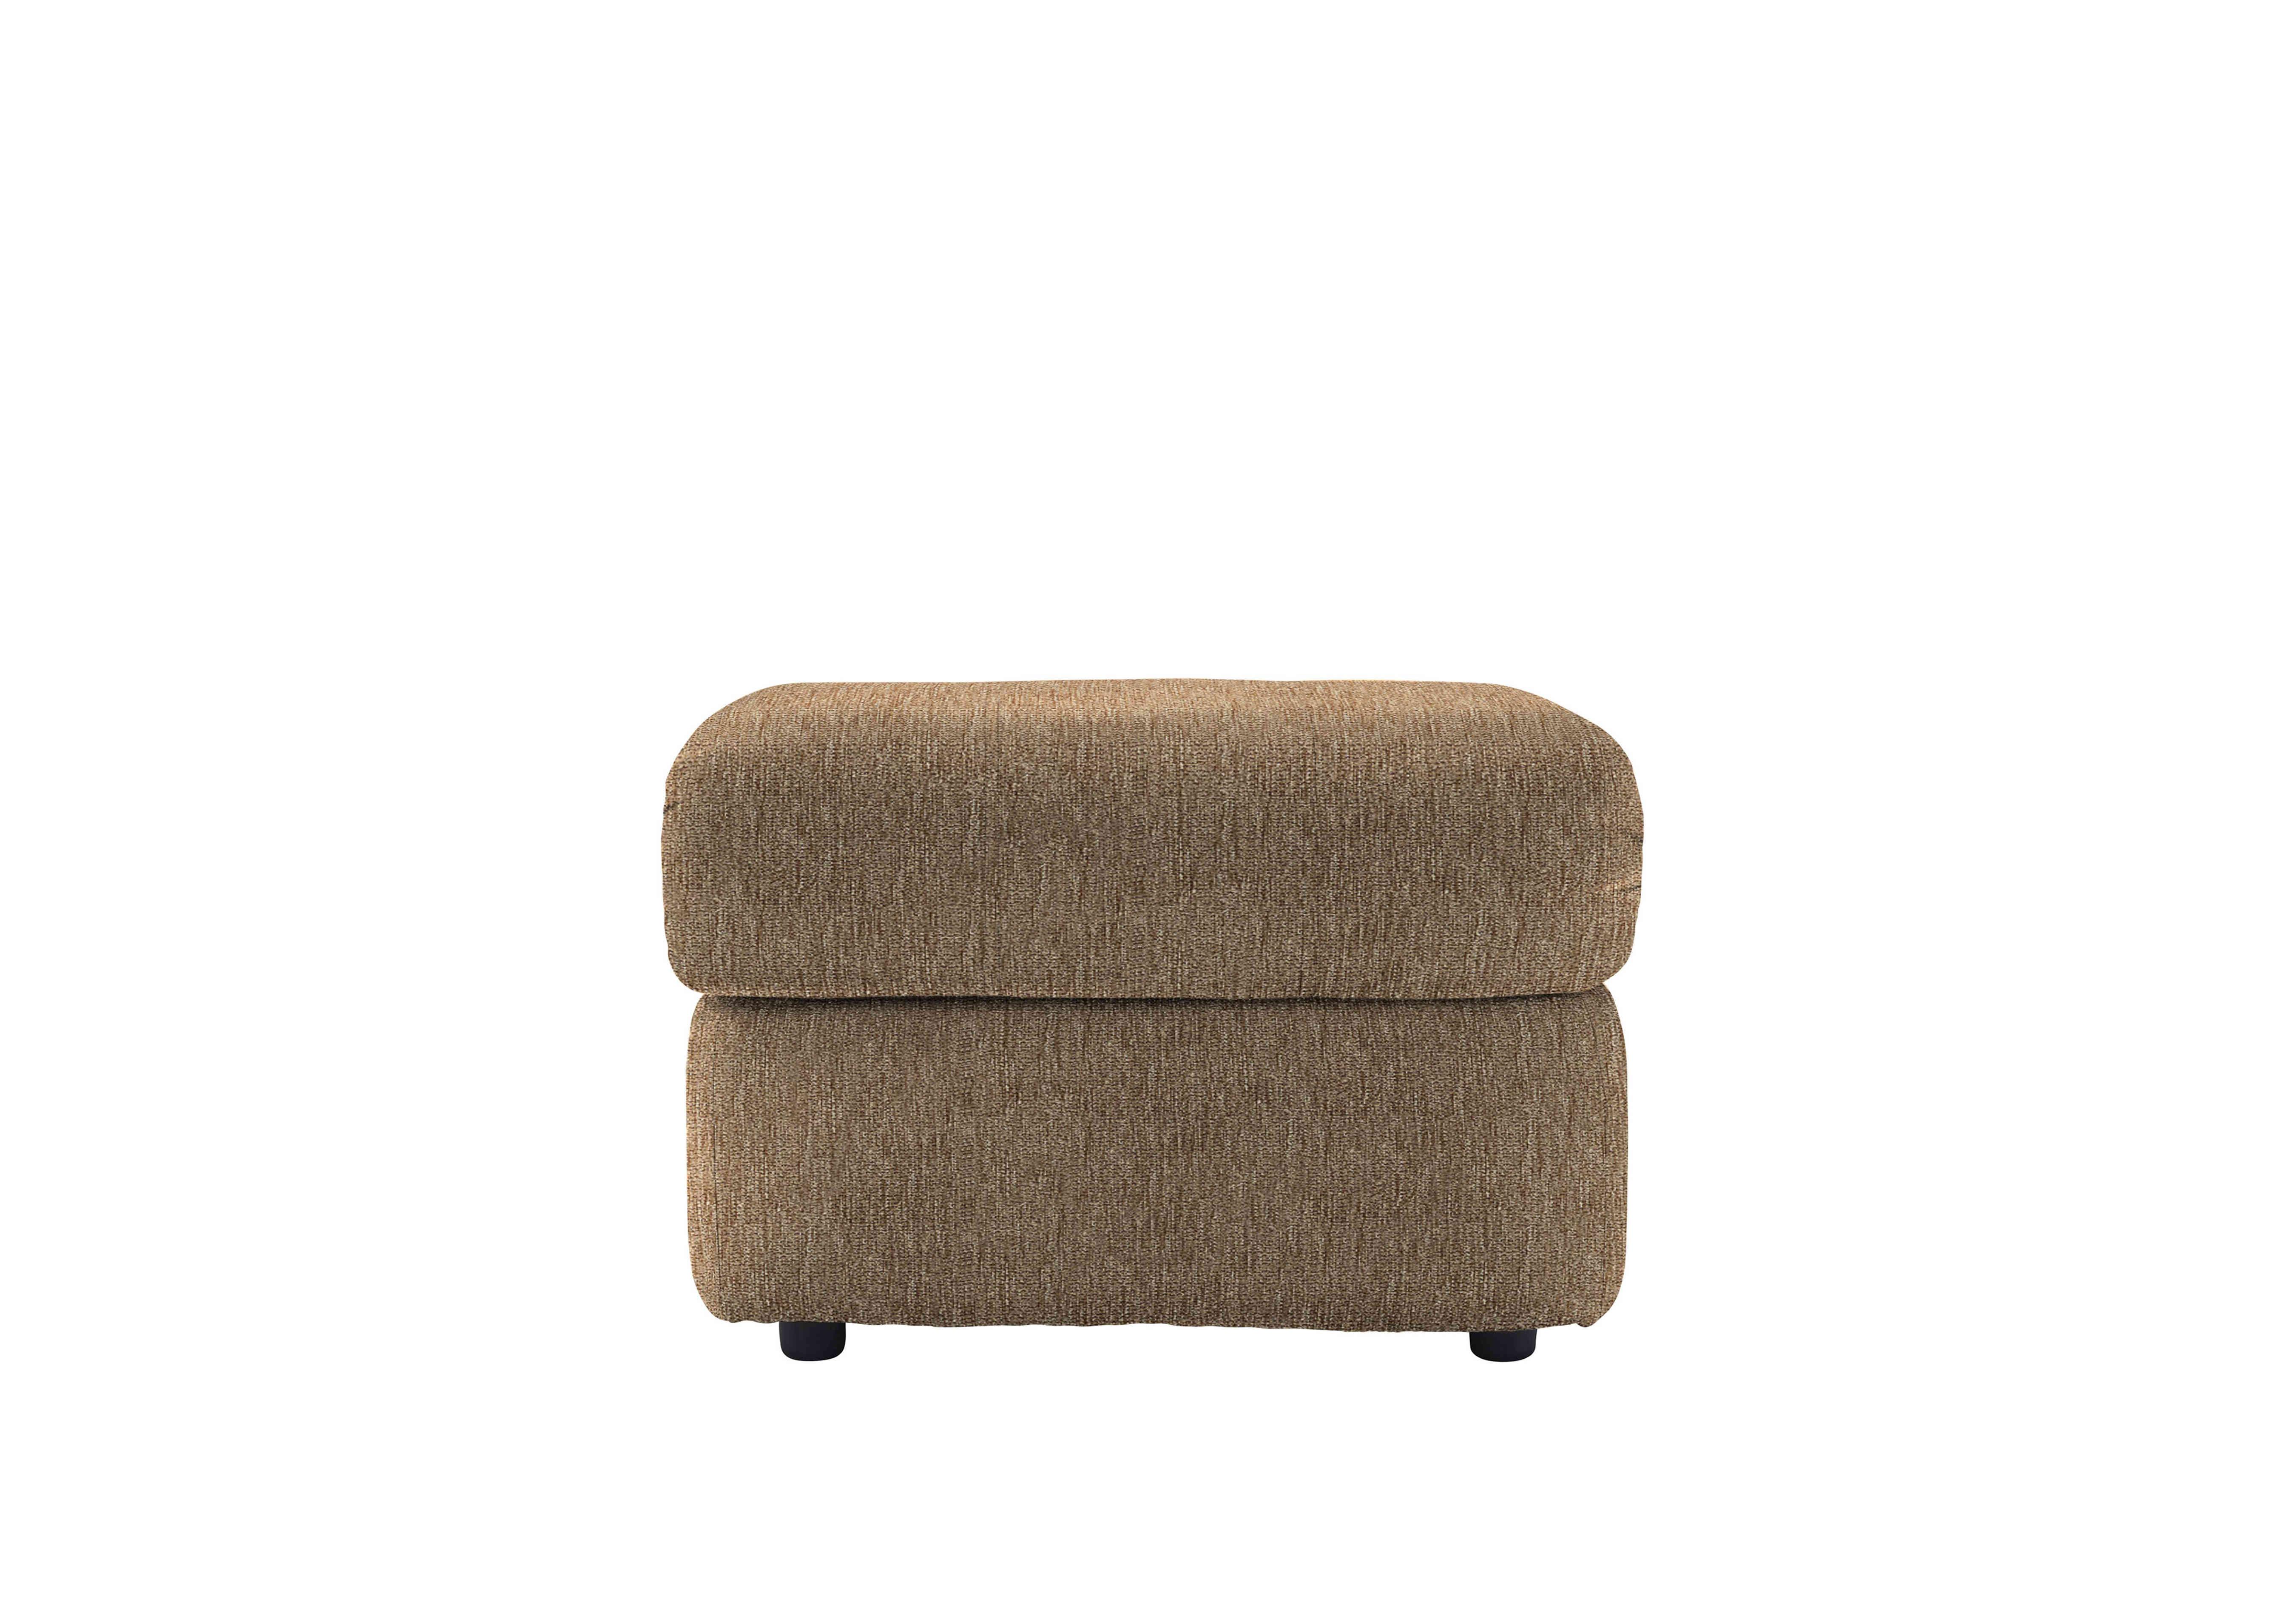 Chloe Fabric Footstool in A070 Boucle Cocoa on Furniture Village